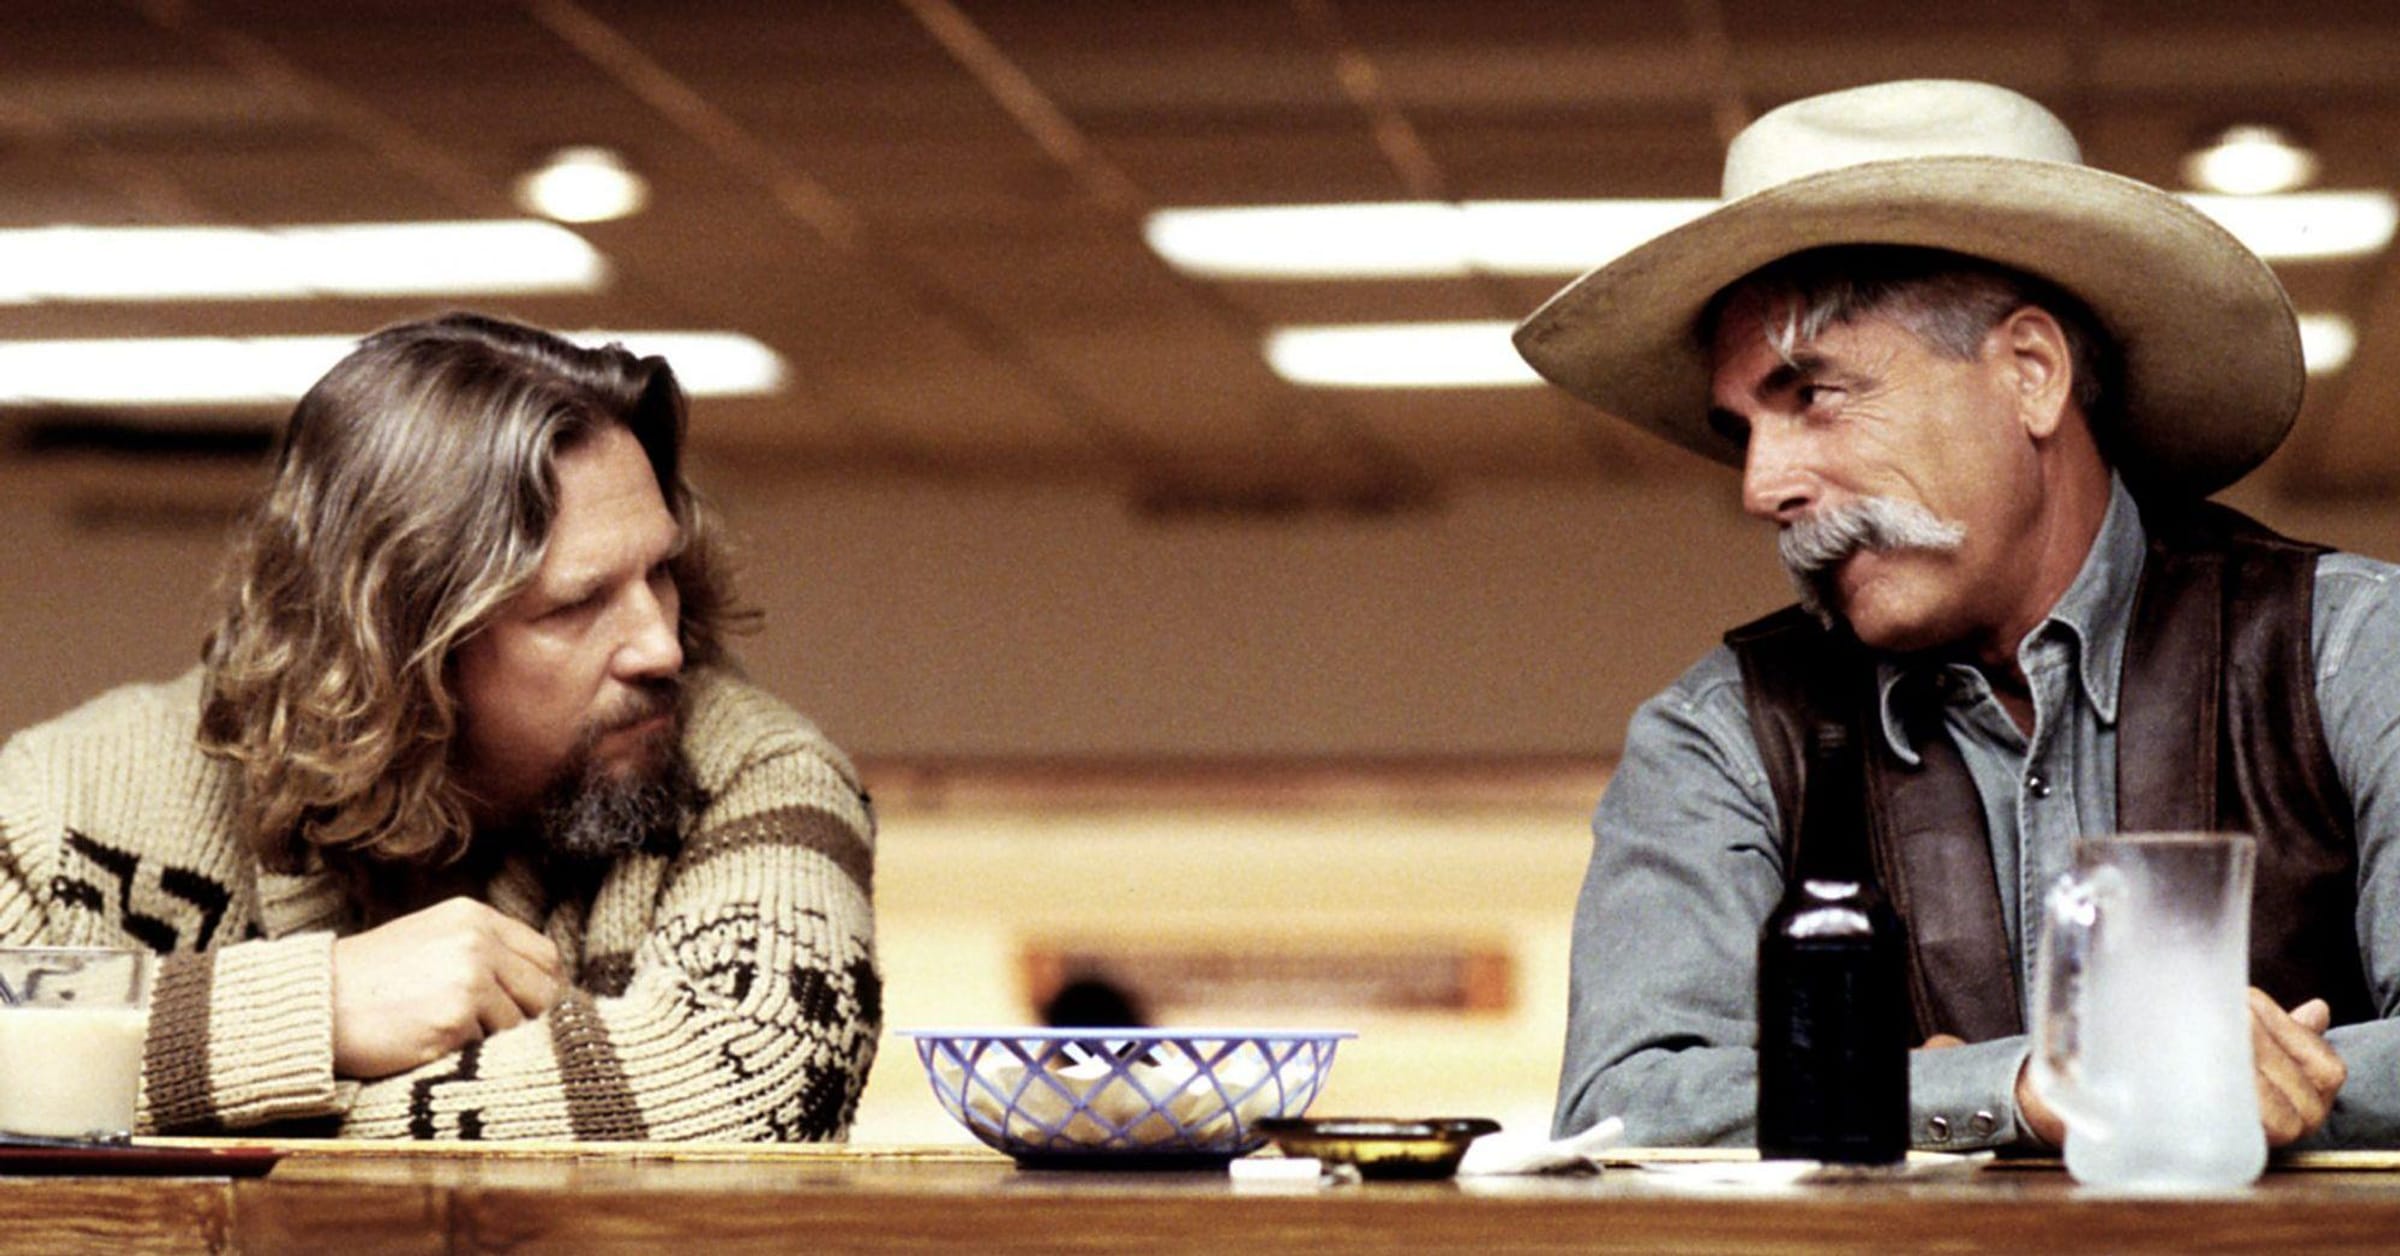 The Dude at 20: fascinating facts about the legendary film The Big Lebowski